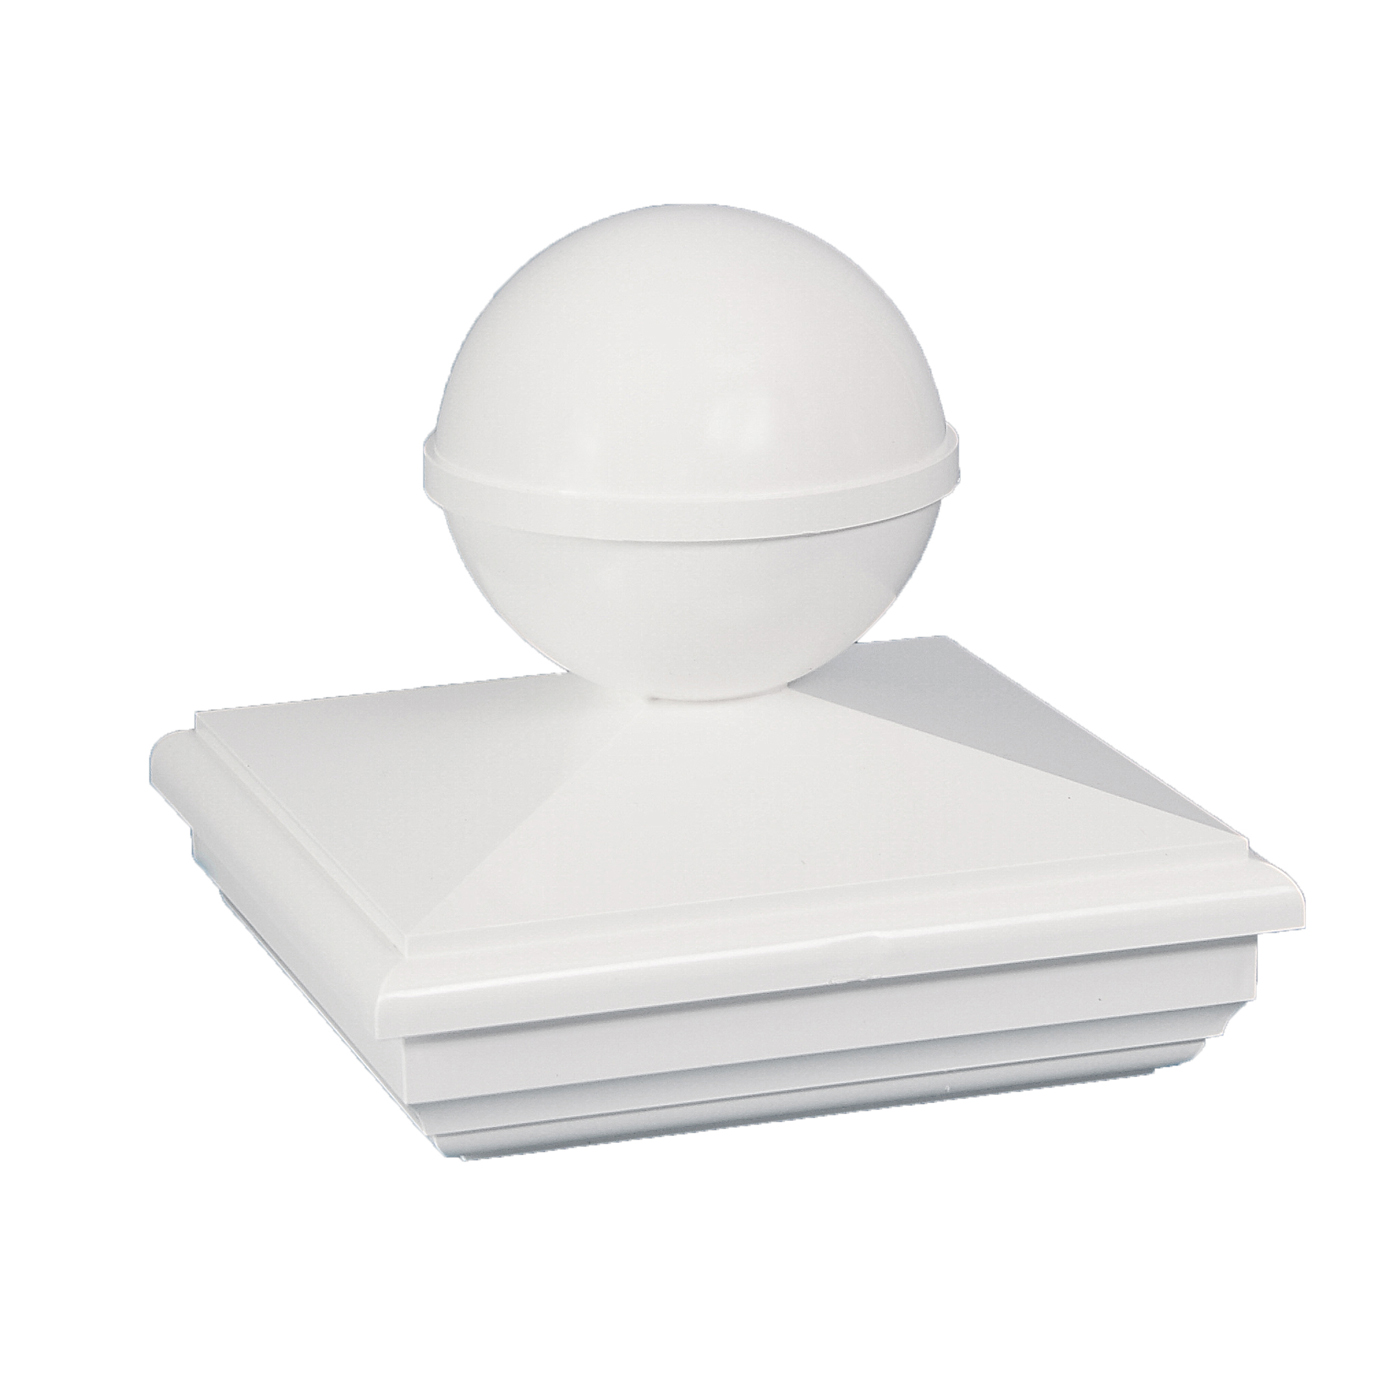 Picture of Classy Caps BN244 NEW ENGLAND BALL PVC POST CAP 4X4 - White